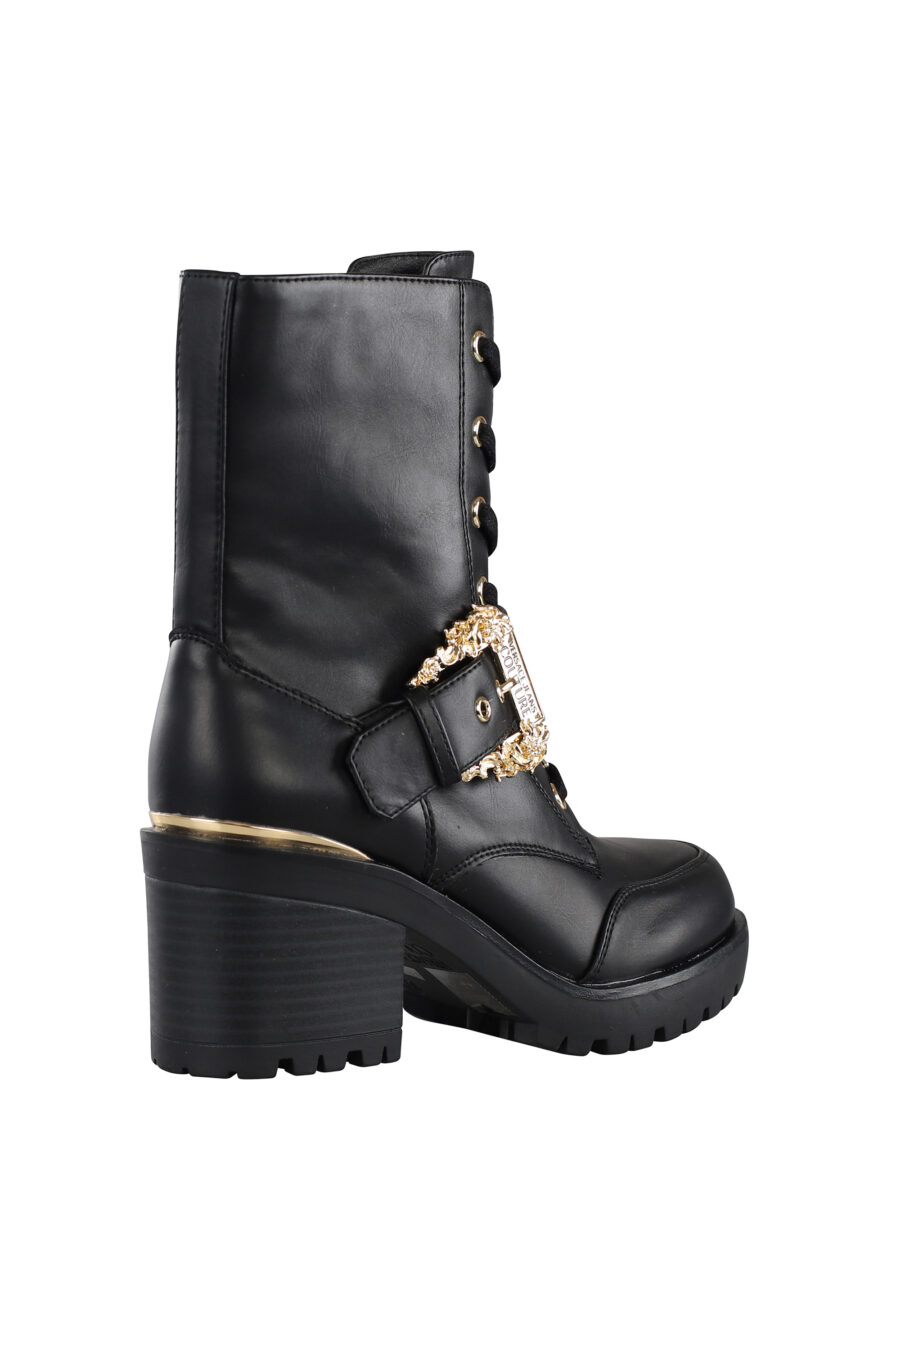 Black boots with baroque buckle and heel - IMG 7128